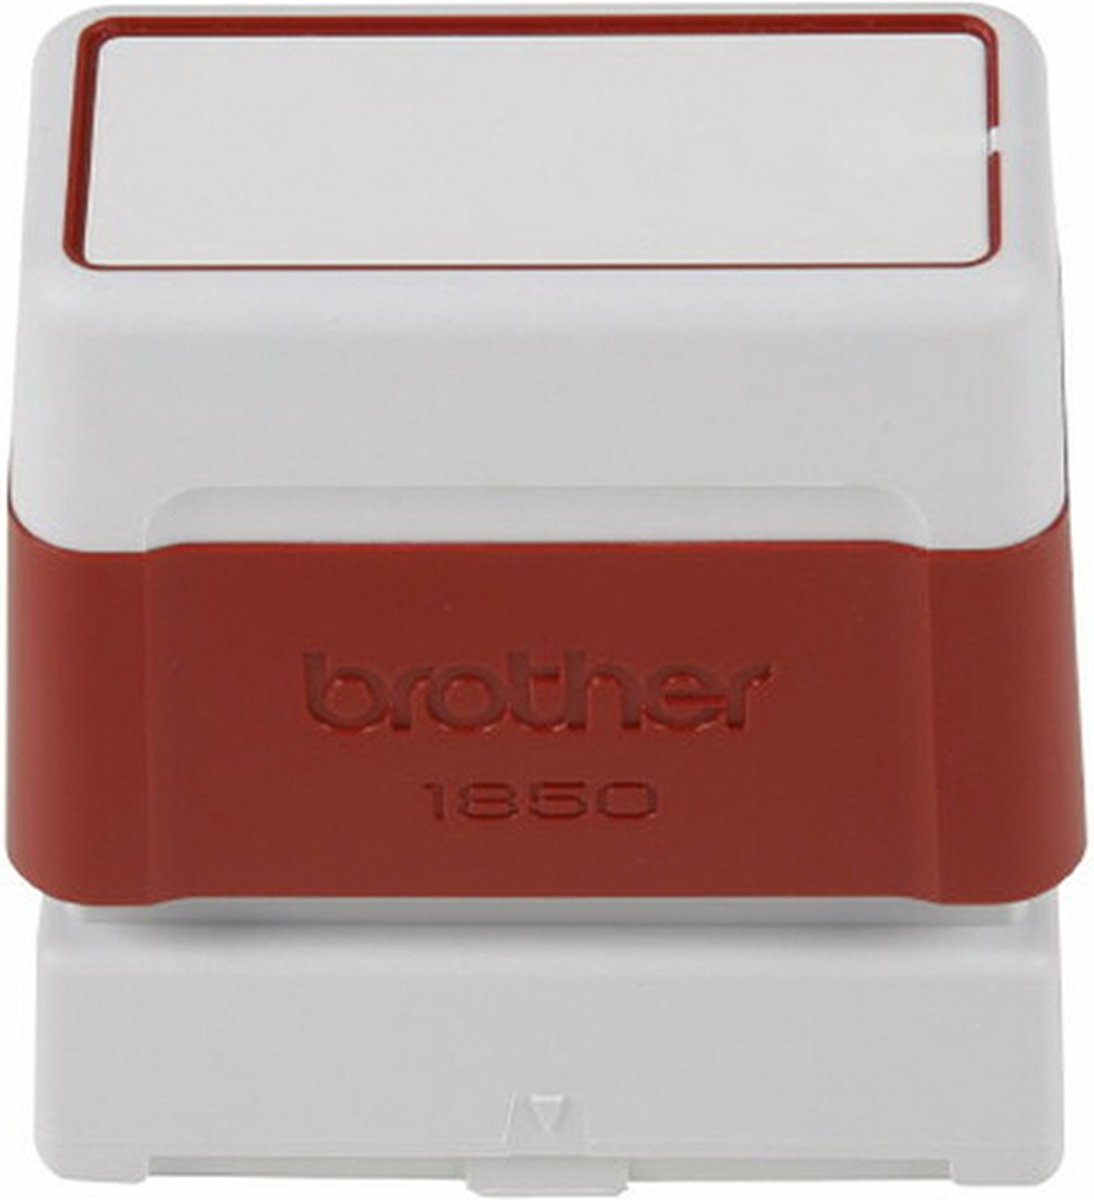 Brother PR-1850-Rood